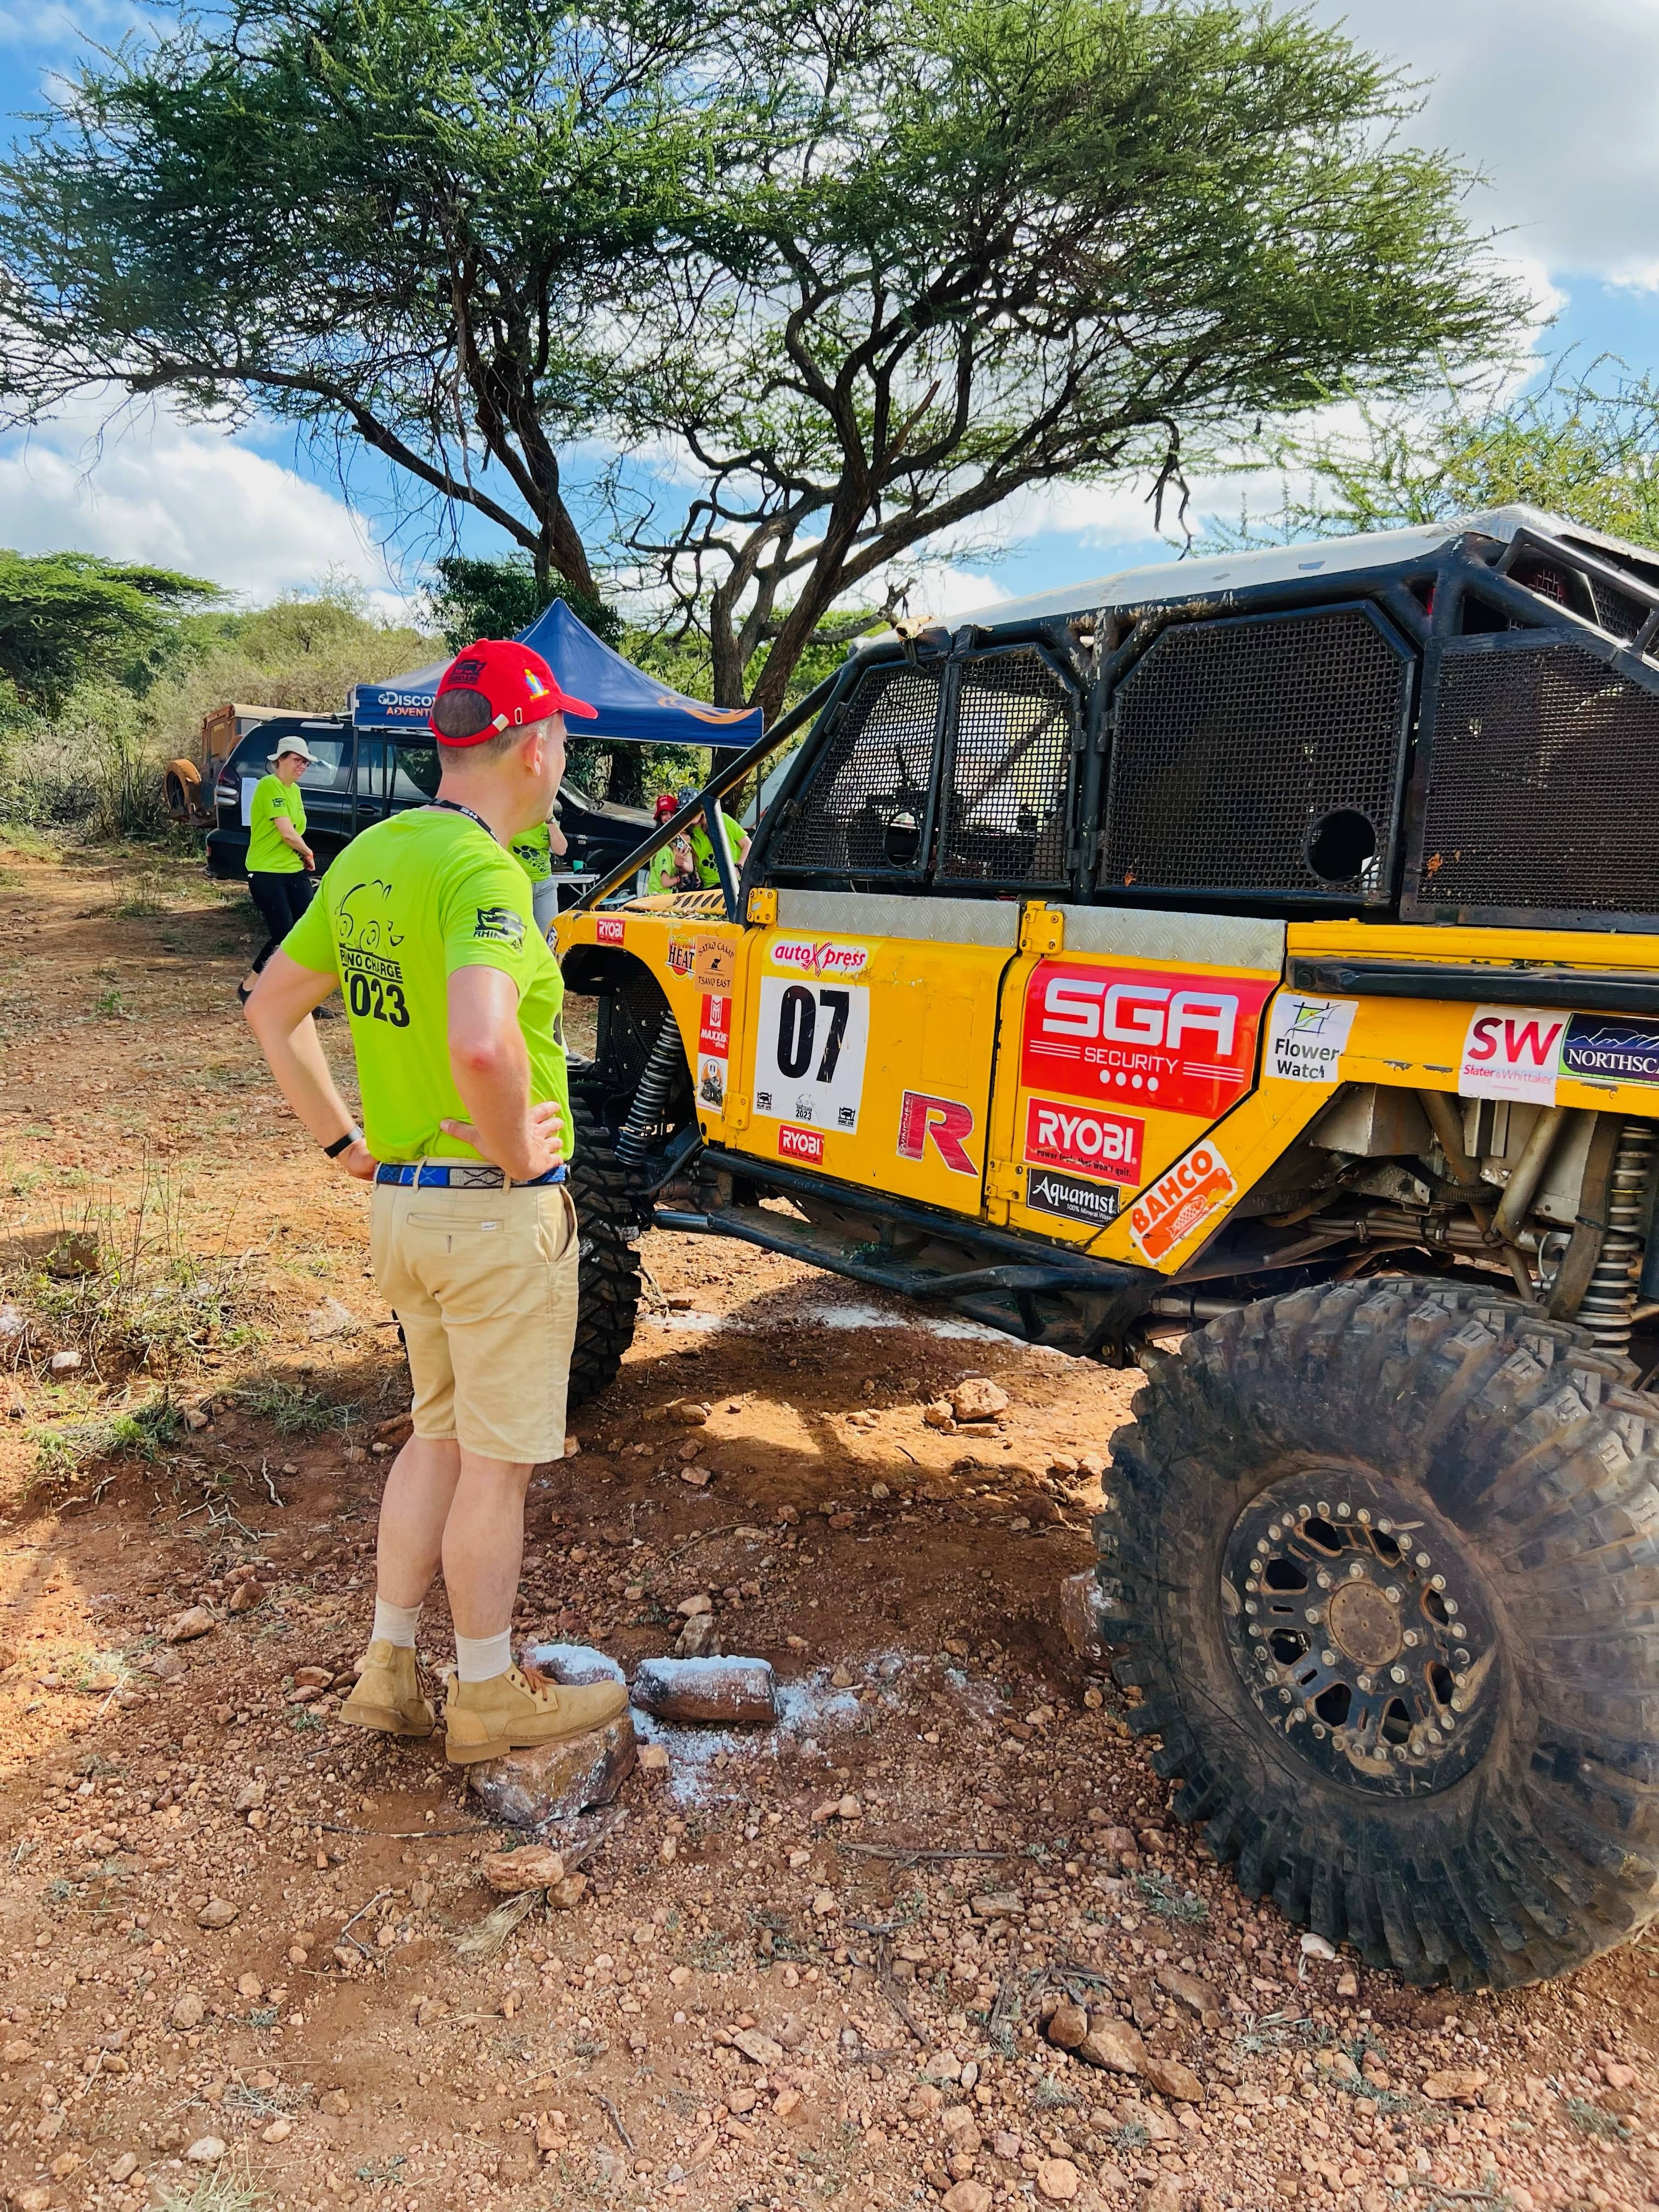 SGA Security CEO and Chairman Jules Delahaije expressed his enthusiasm to be part of the sponsors for this rhino charge event in kenya